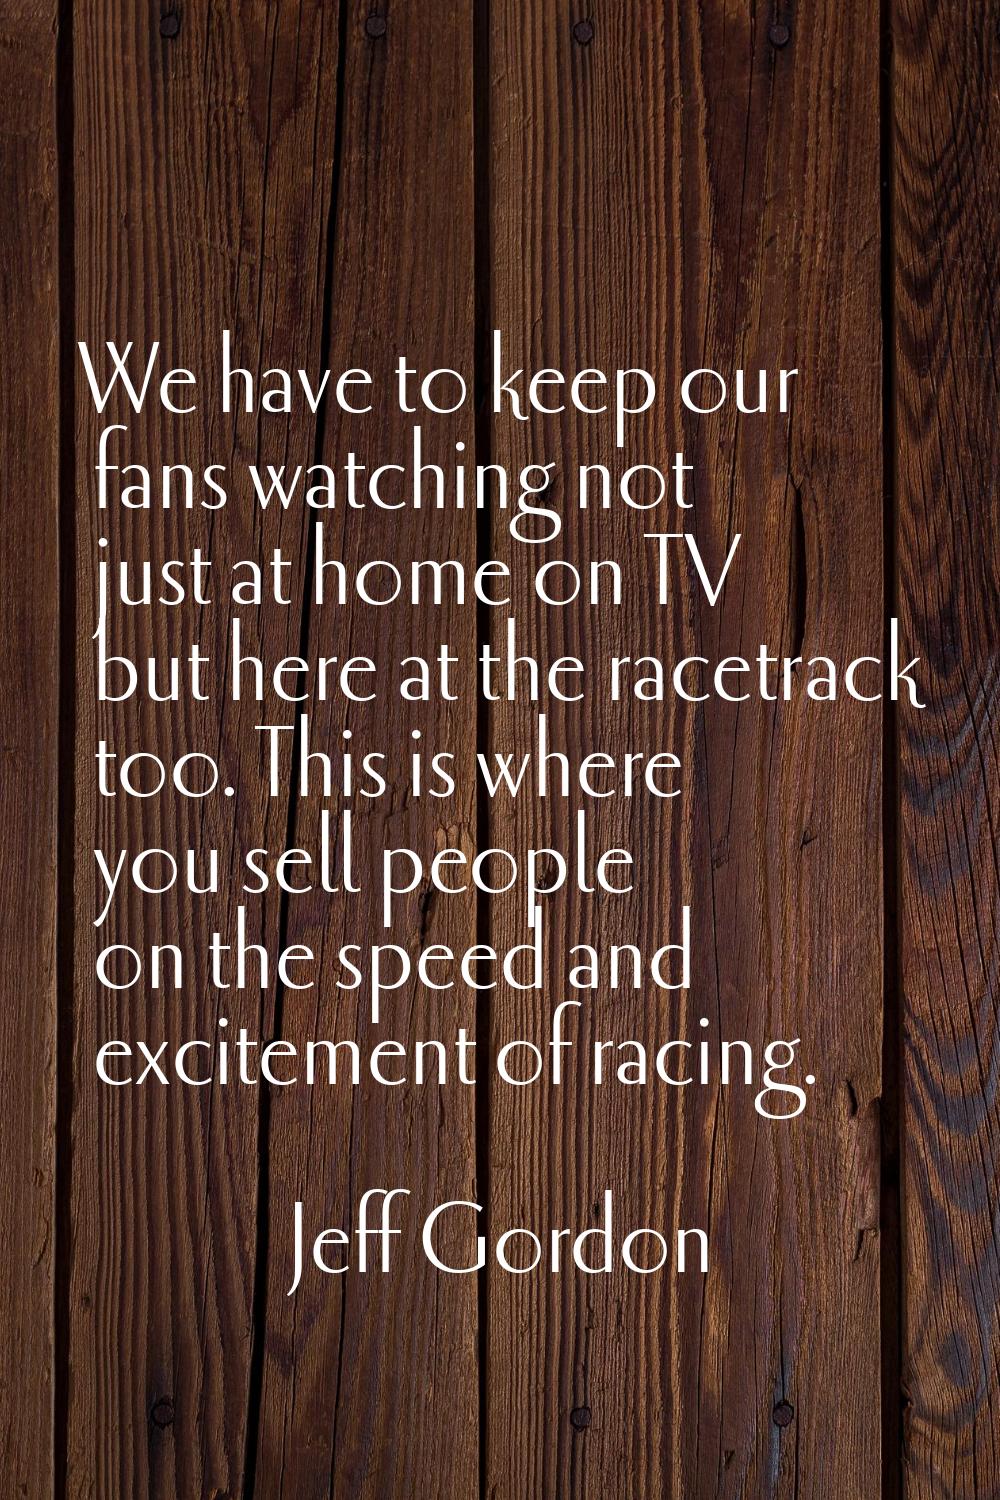 We have to keep our fans watching not just at home on TV but here at the racetrack too. This is whe